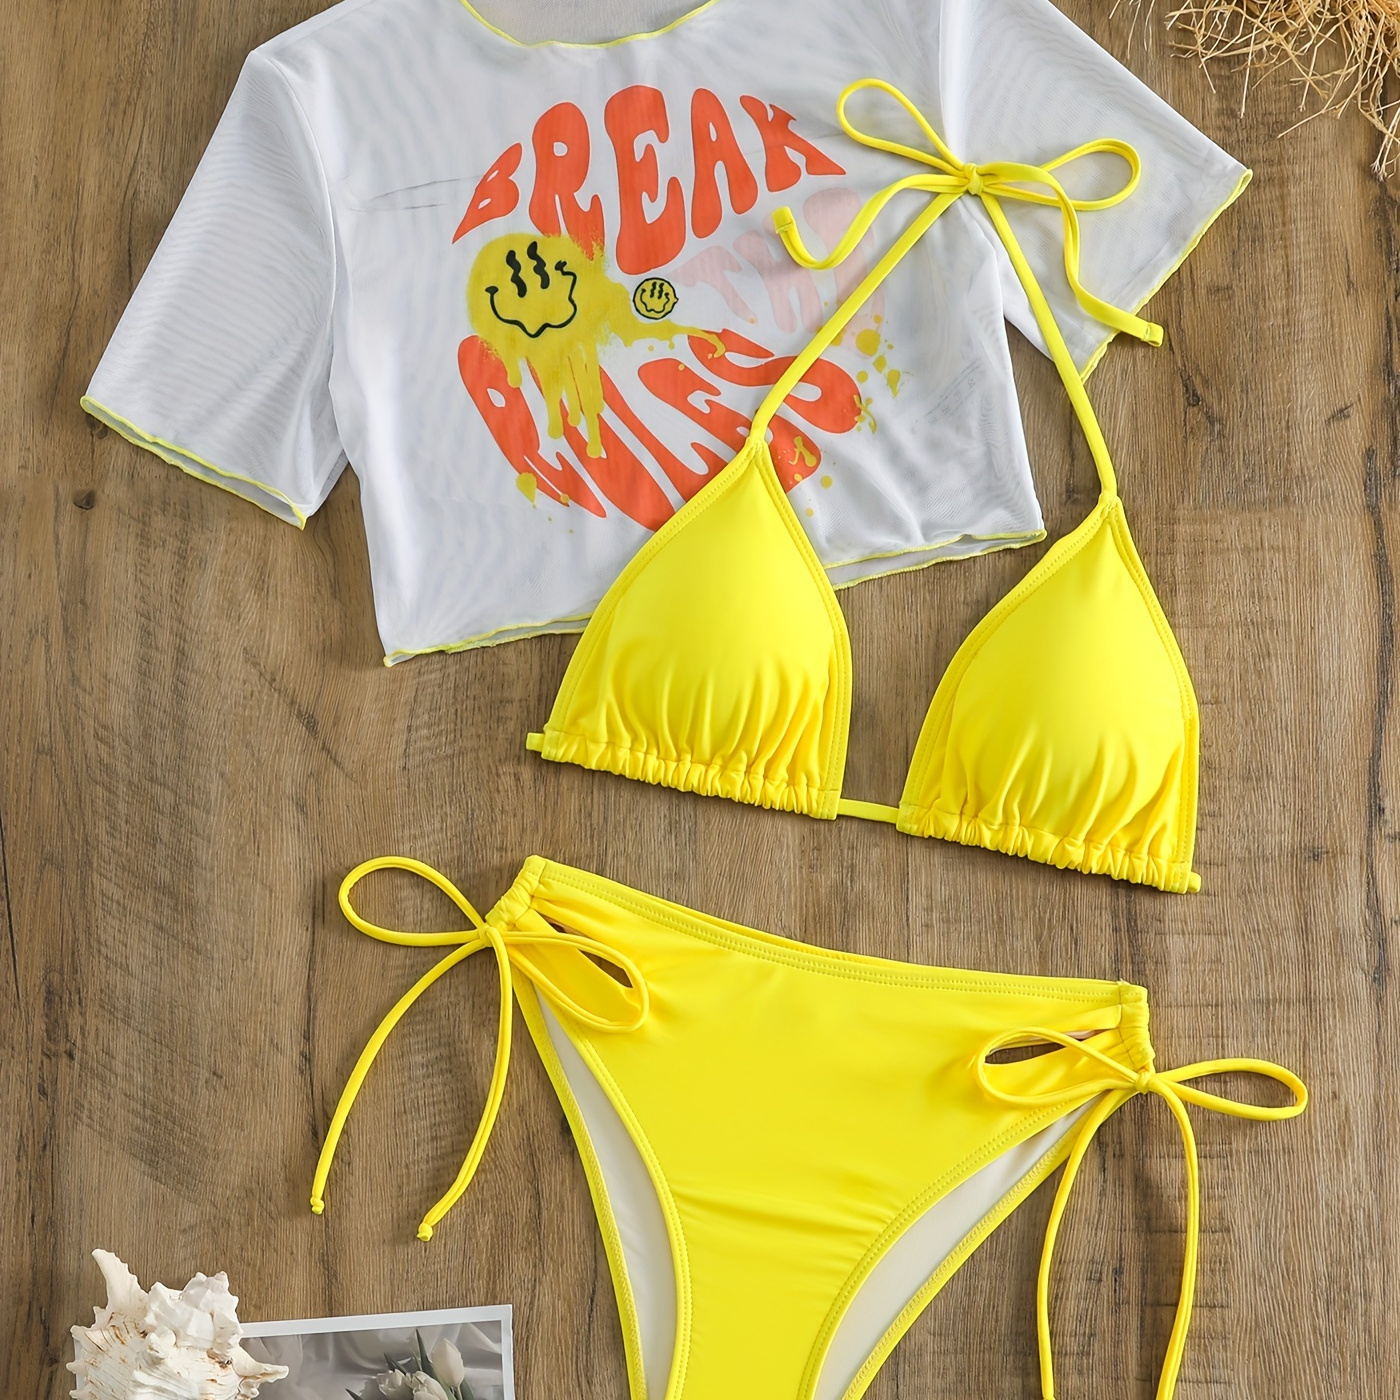 

Plain Halter Hollow Out Bikini With Letter Melting Smile Face Print Cover Up Top, Tie Strap Yellow Cute 3 Piece Set Swimsuits, Women's Swimwear & Clothing Triangle Top